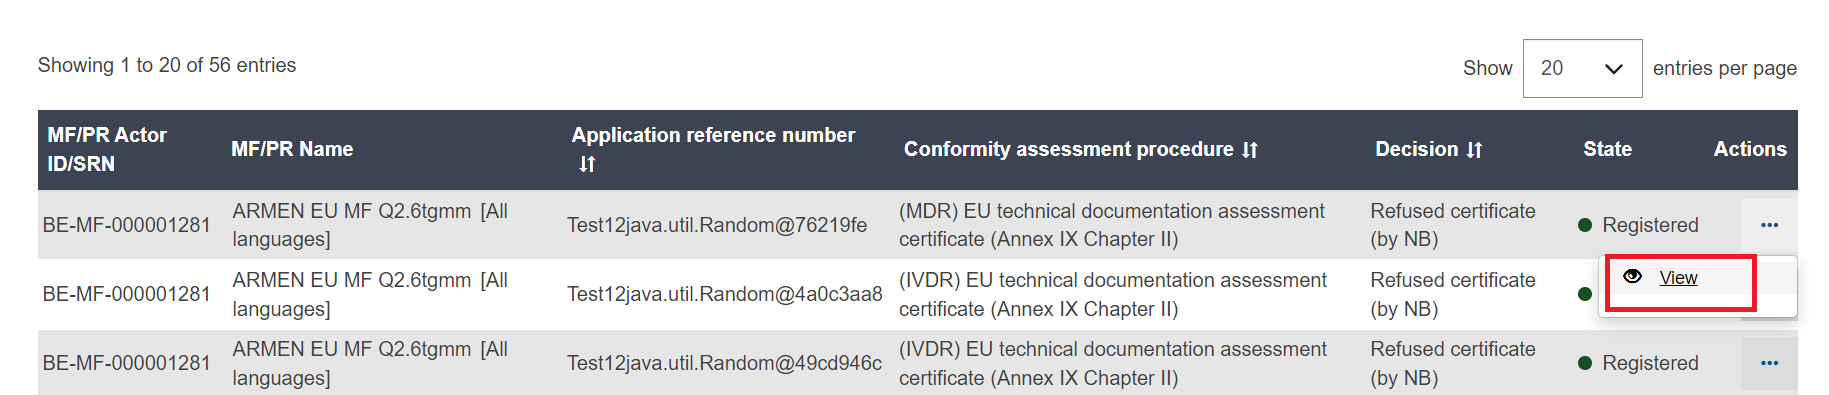 EUDAMED view link in the refused certificates/applications management page